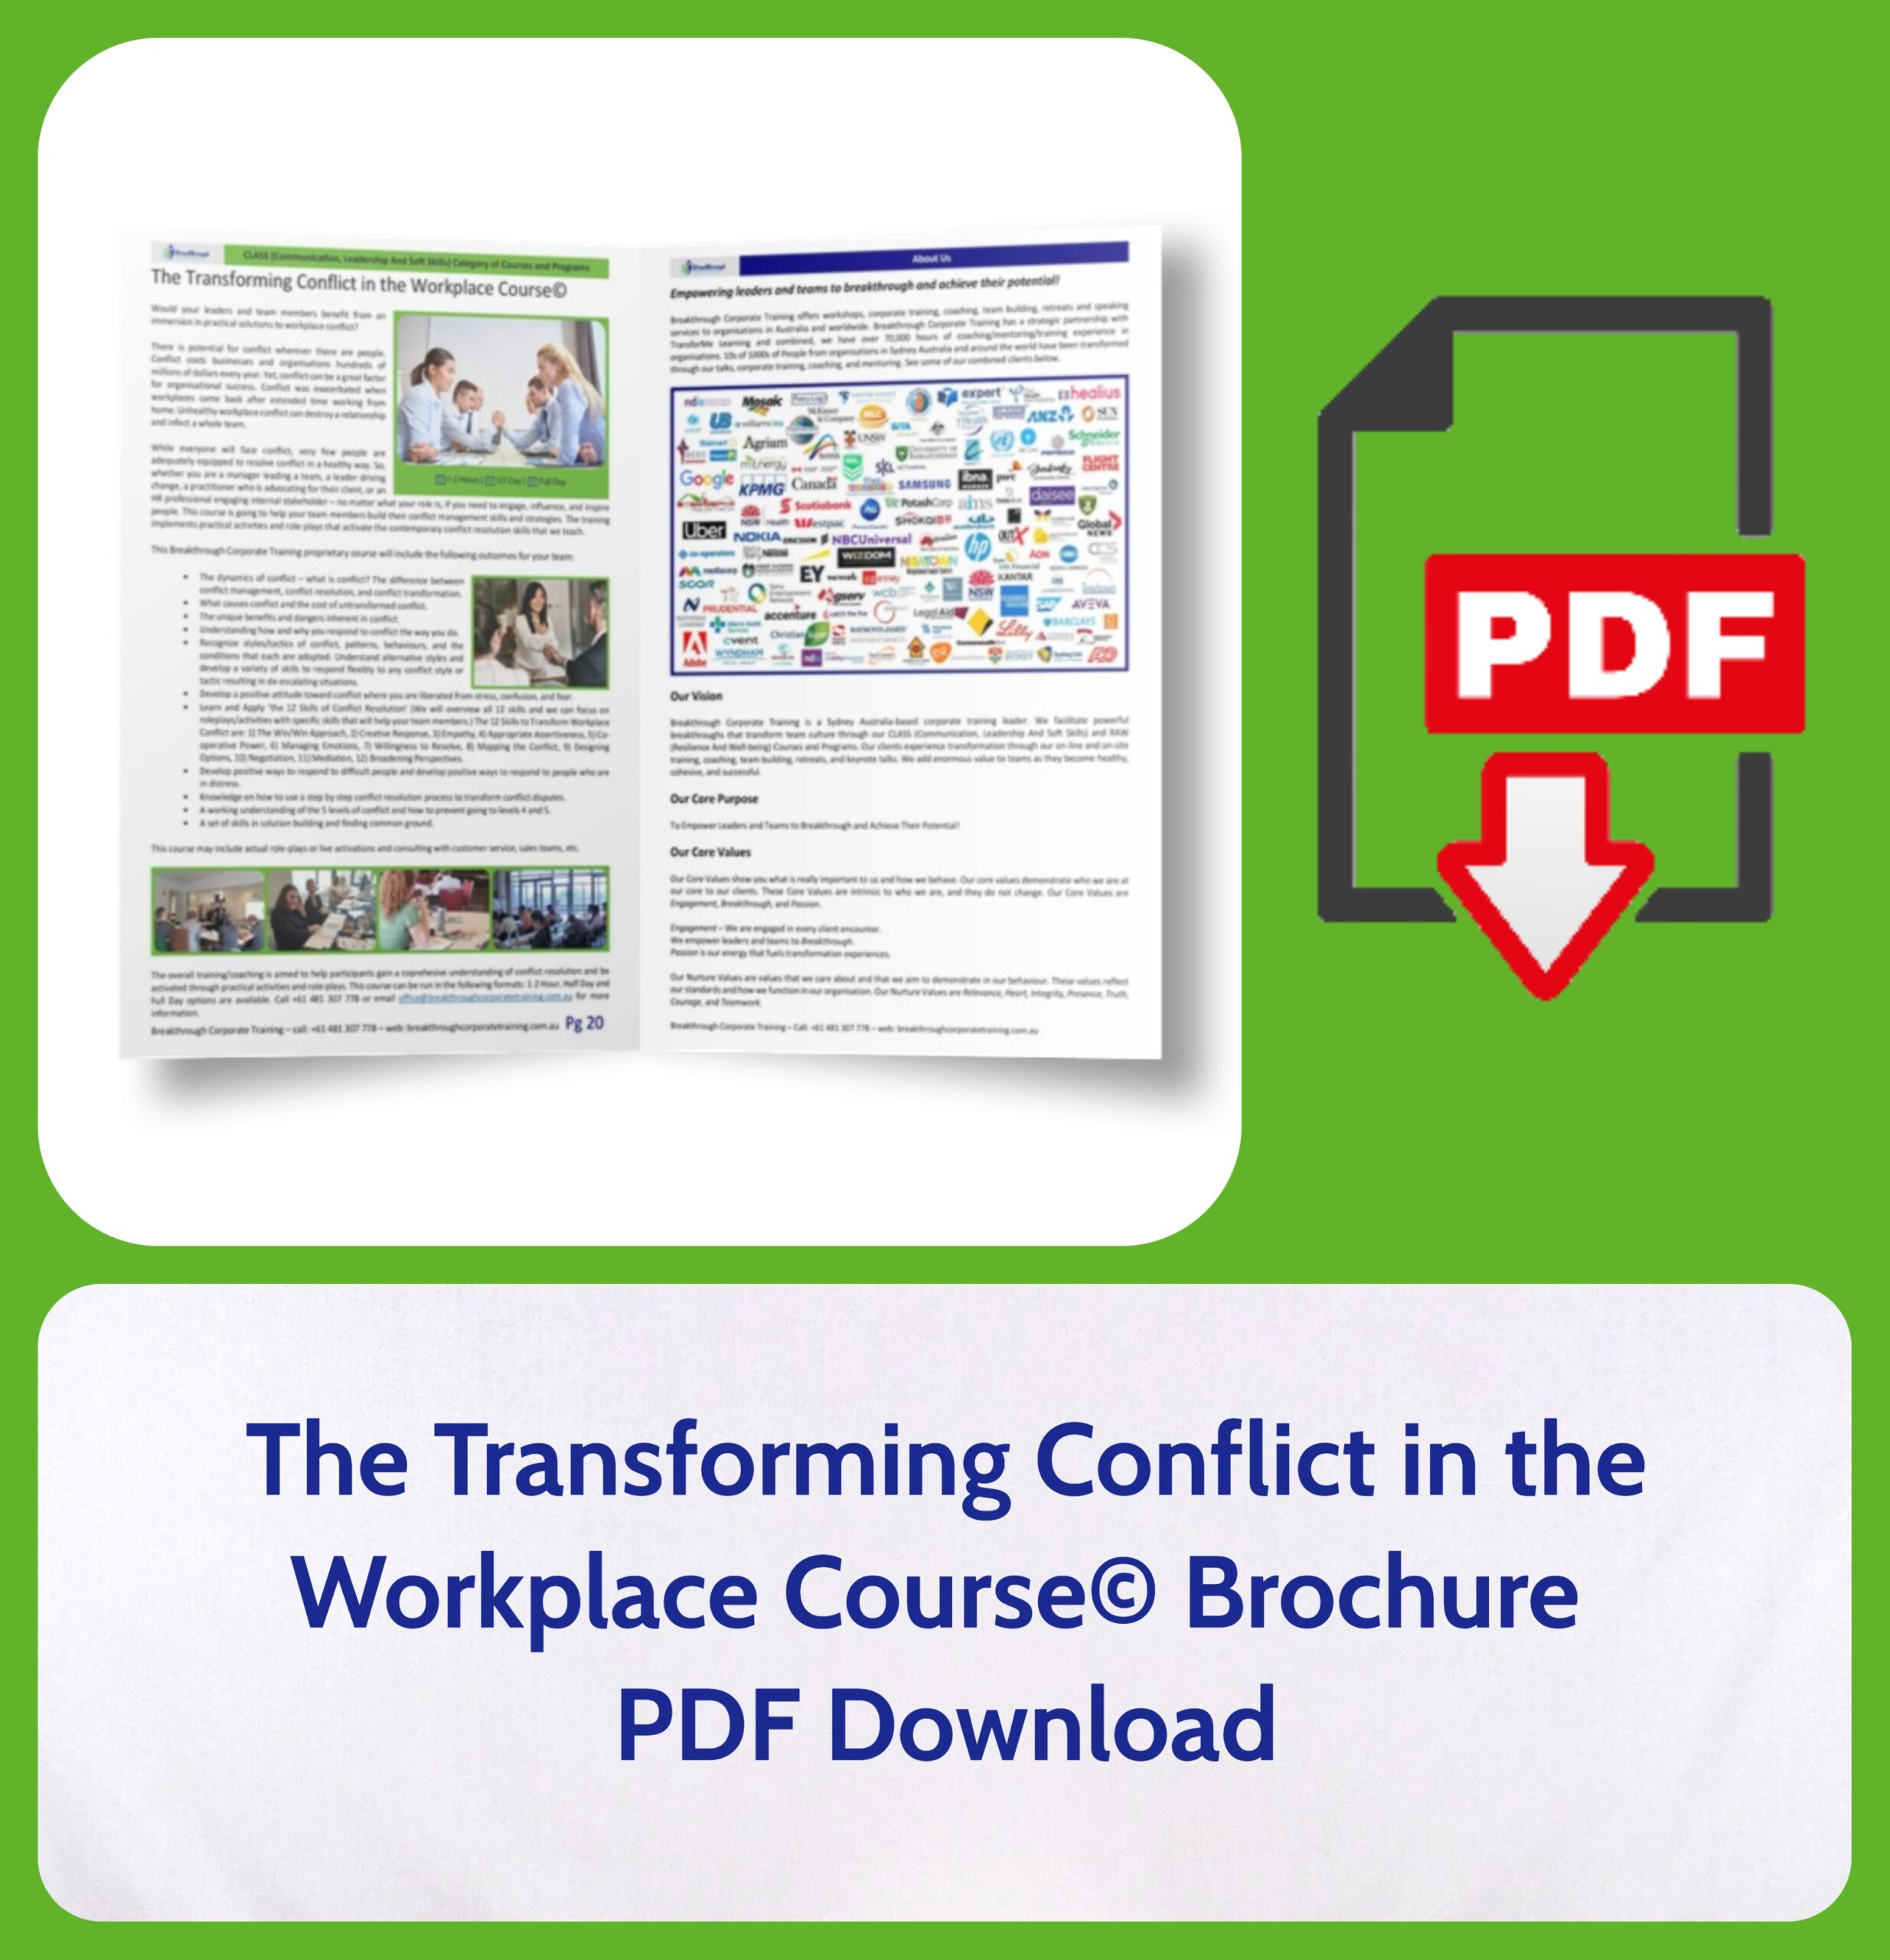 The Transforming Conflict in the Workplace Course